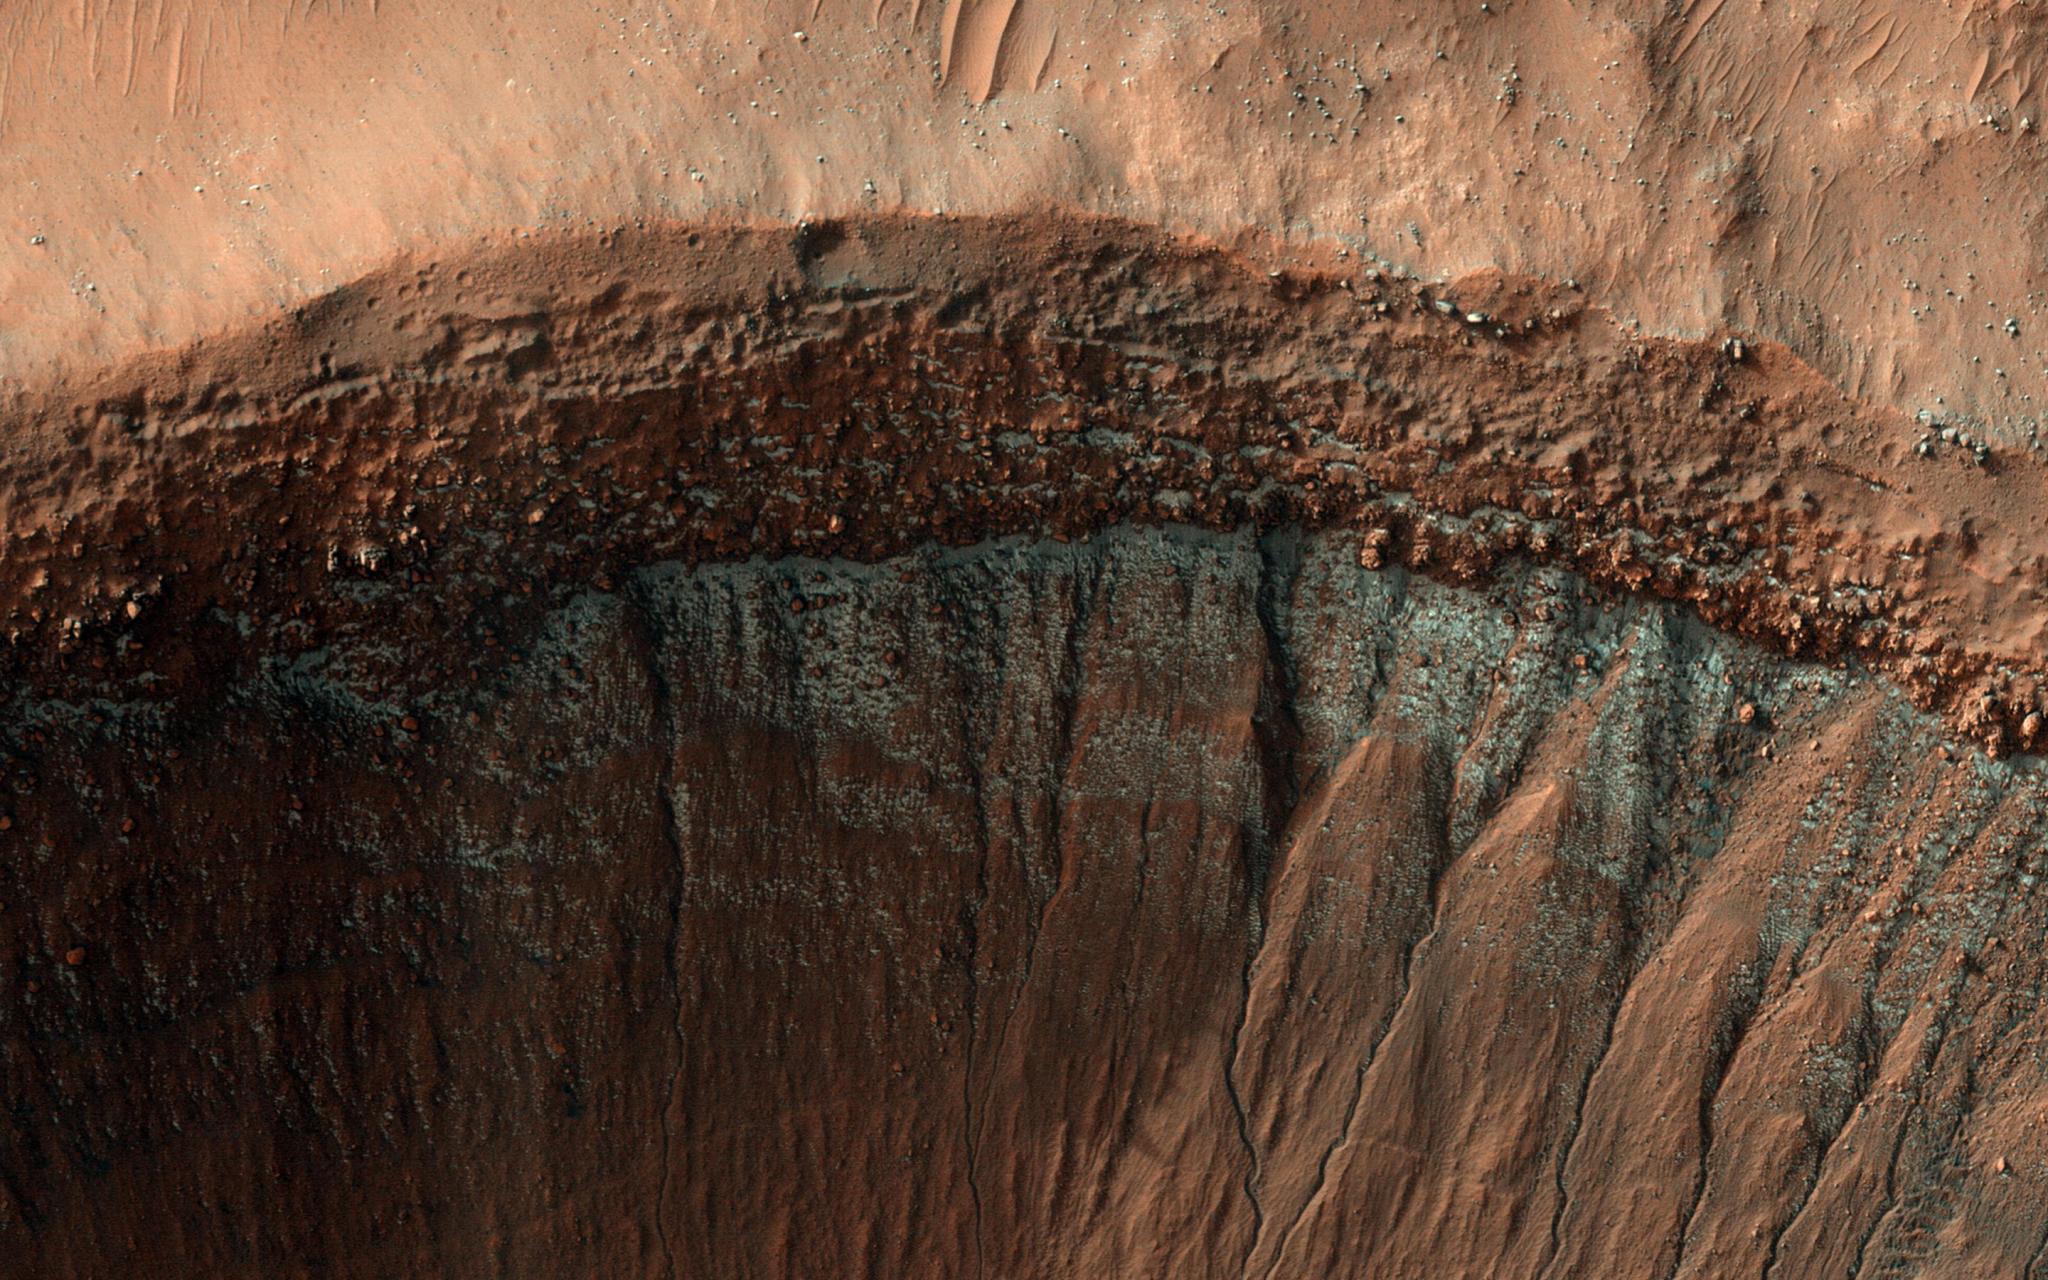 The HiRISE camera captured this image of the edge of a crater in the middle of winter. The south-facing slope of the crater, which receives less sunlight, has formed patchy, bright frost, seen in blue in this enhanced-color image.